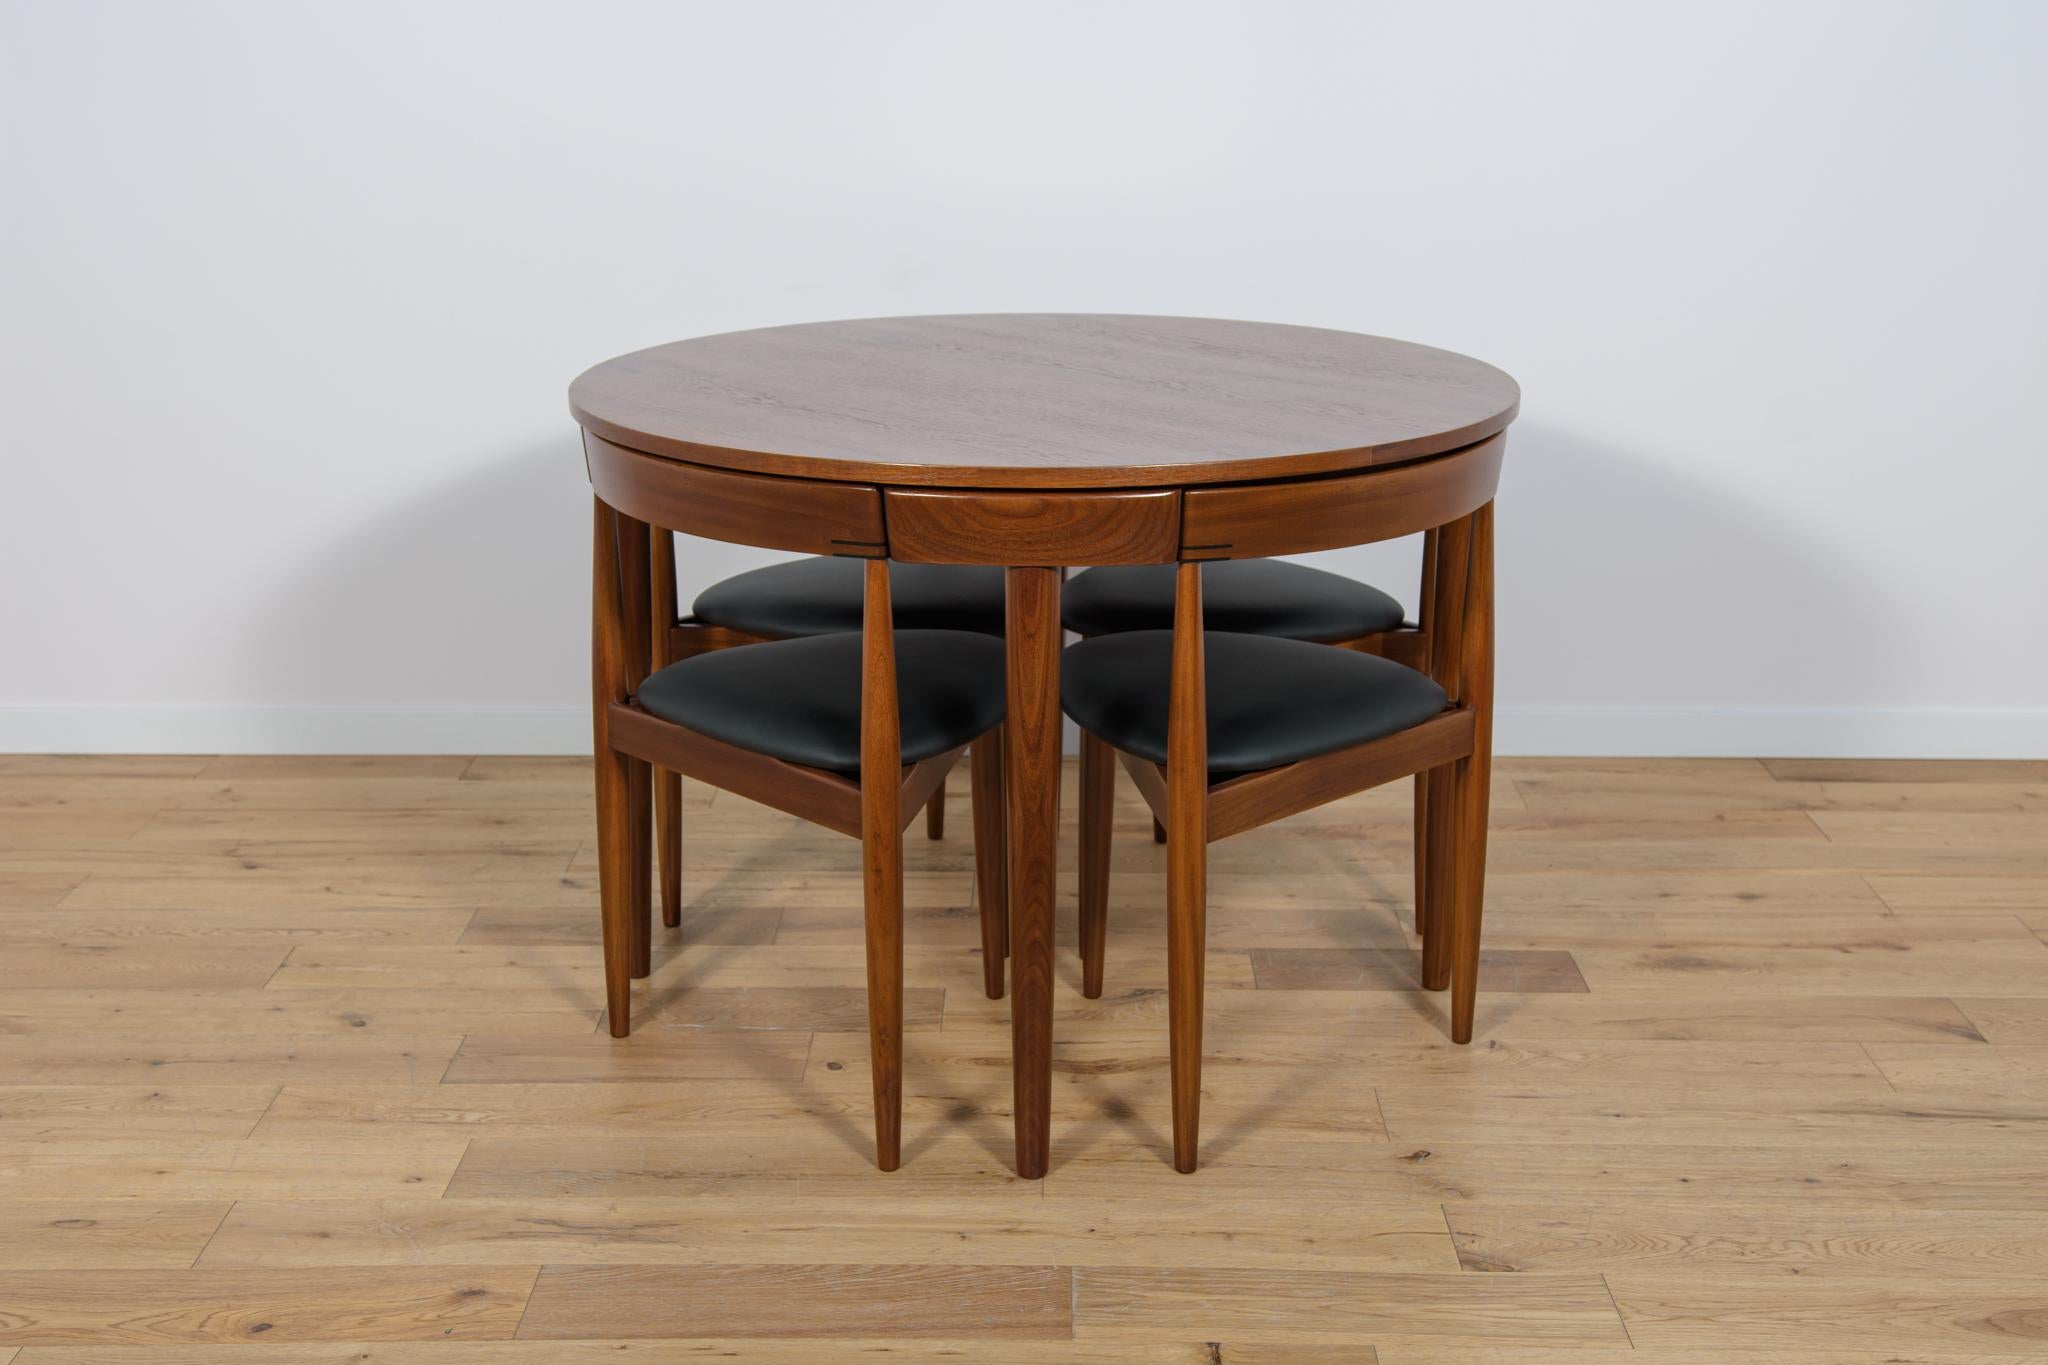 Danish Mid-Century Teak Dining Table and Chairs Set by Hans Olsen for Frem Røjle, 1950s For Sale